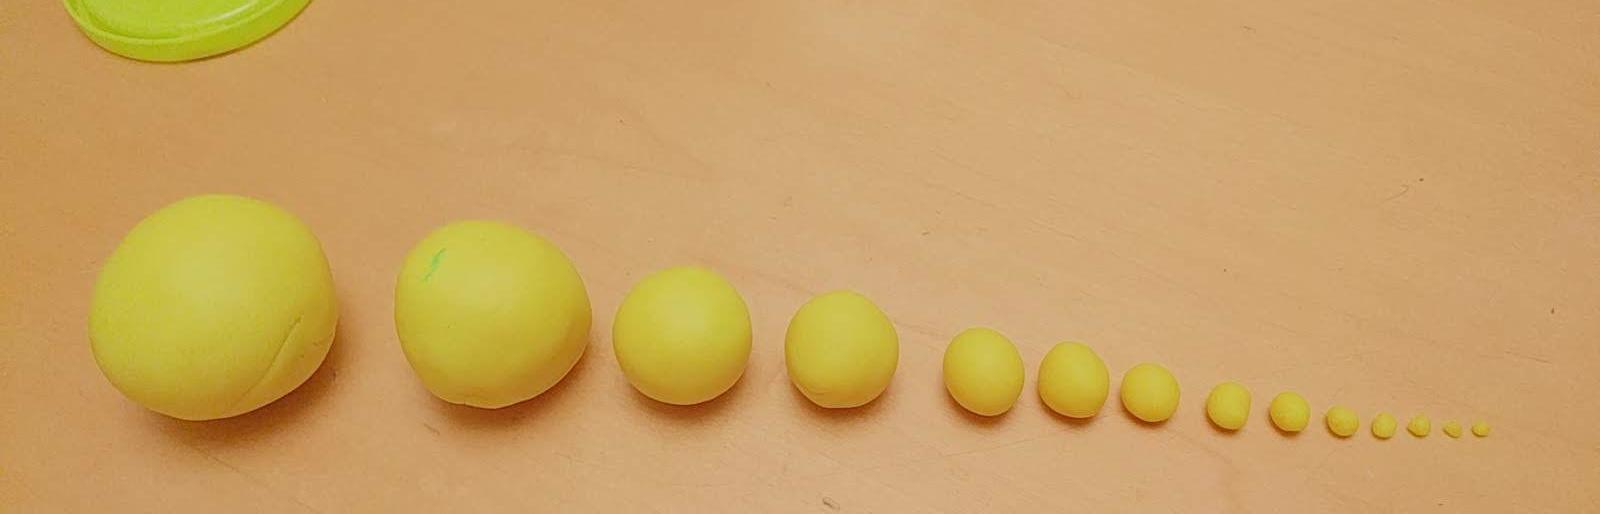 play doh lumps of decreasing size